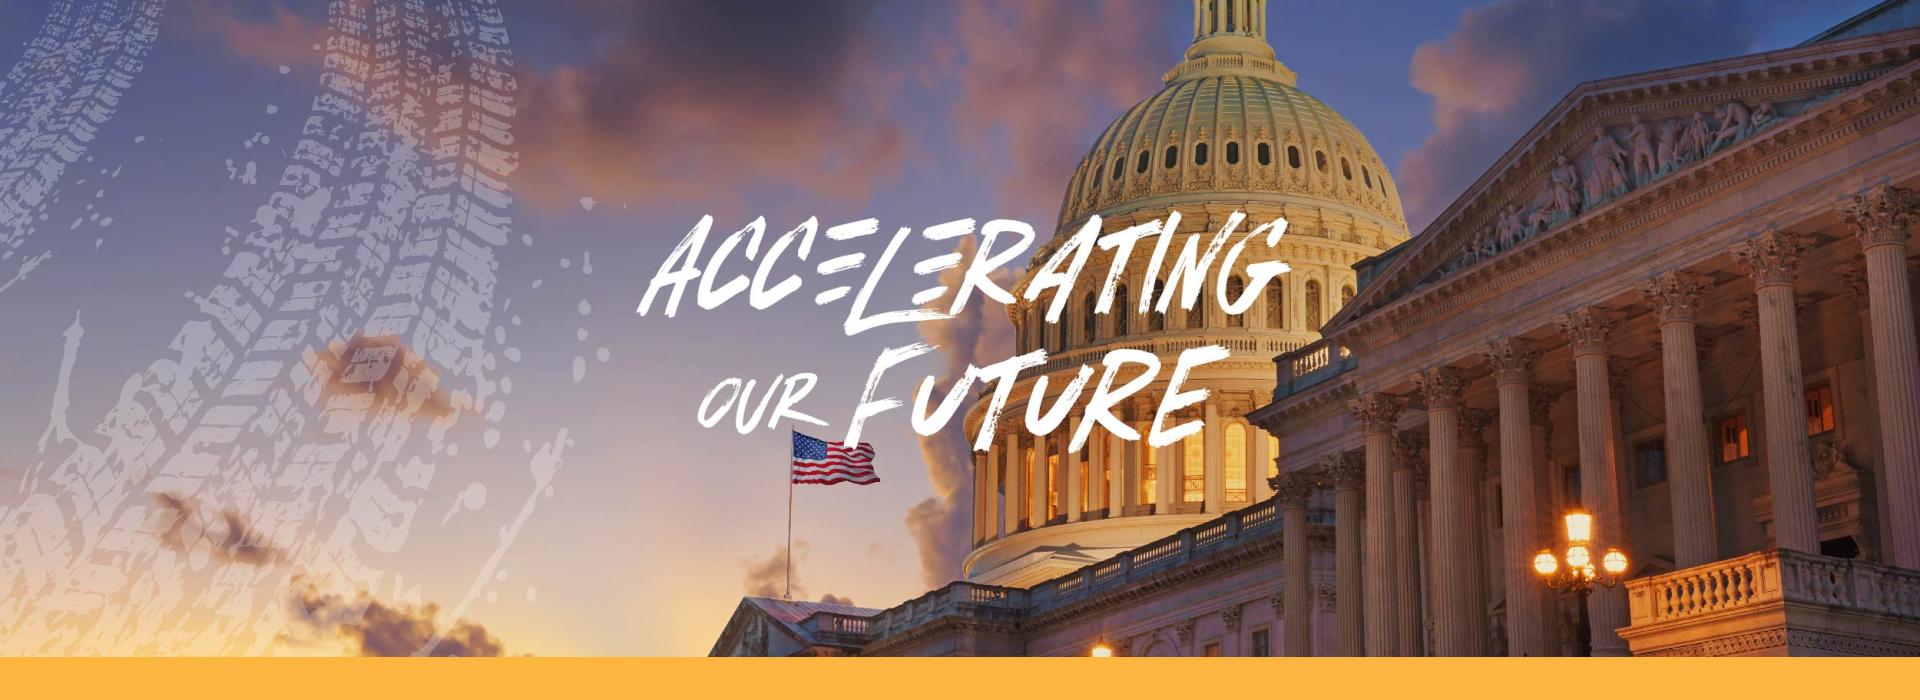 Accelerating our future